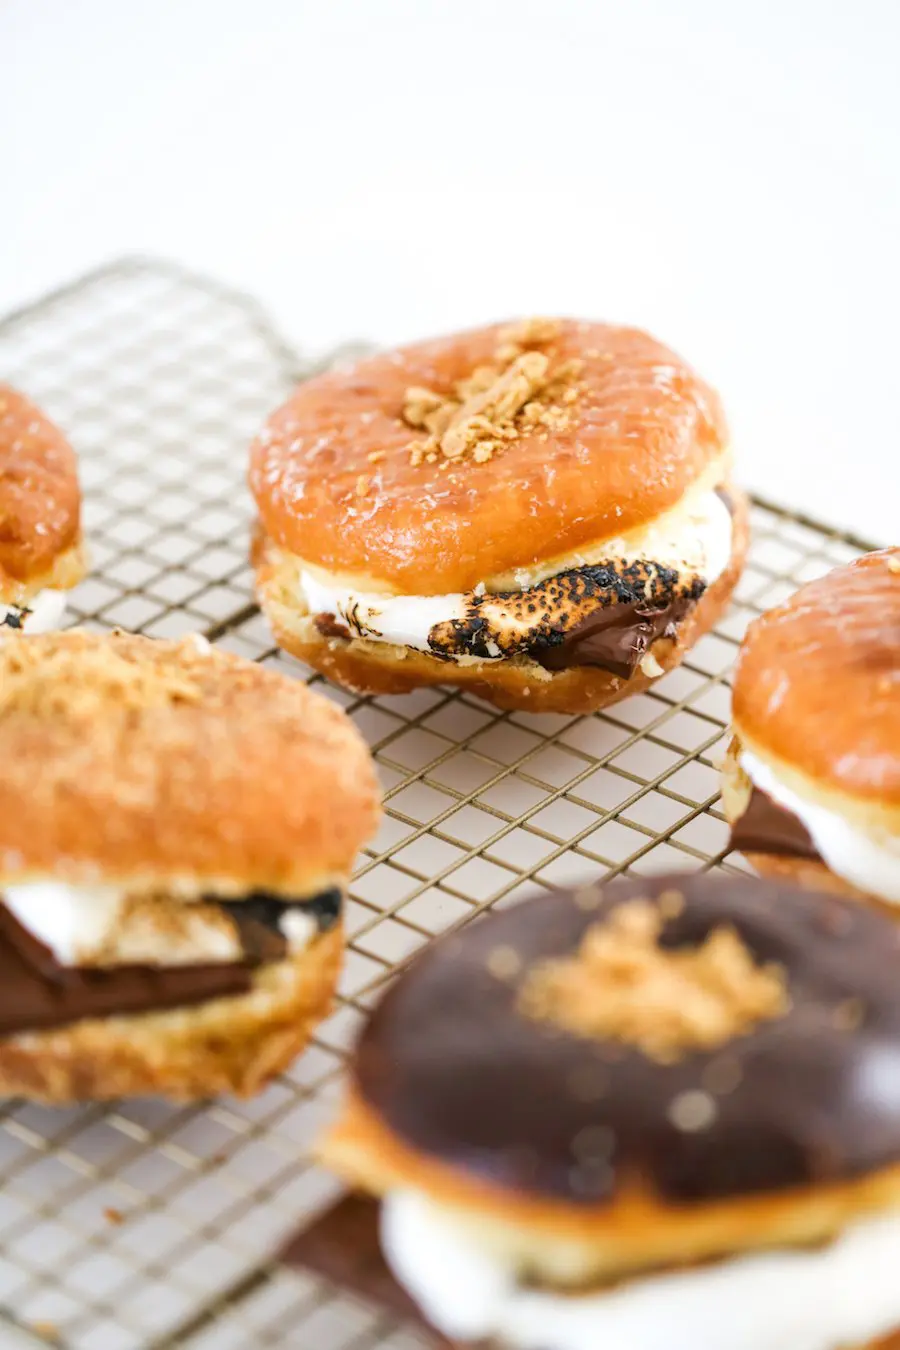 S'mores Donuts, S'mores Donuts Recipe, Store Bought Donuts, Easy S'mores Donuts, Roasting Marshmallows, Firepit, S'mores Summer, Salty Canary